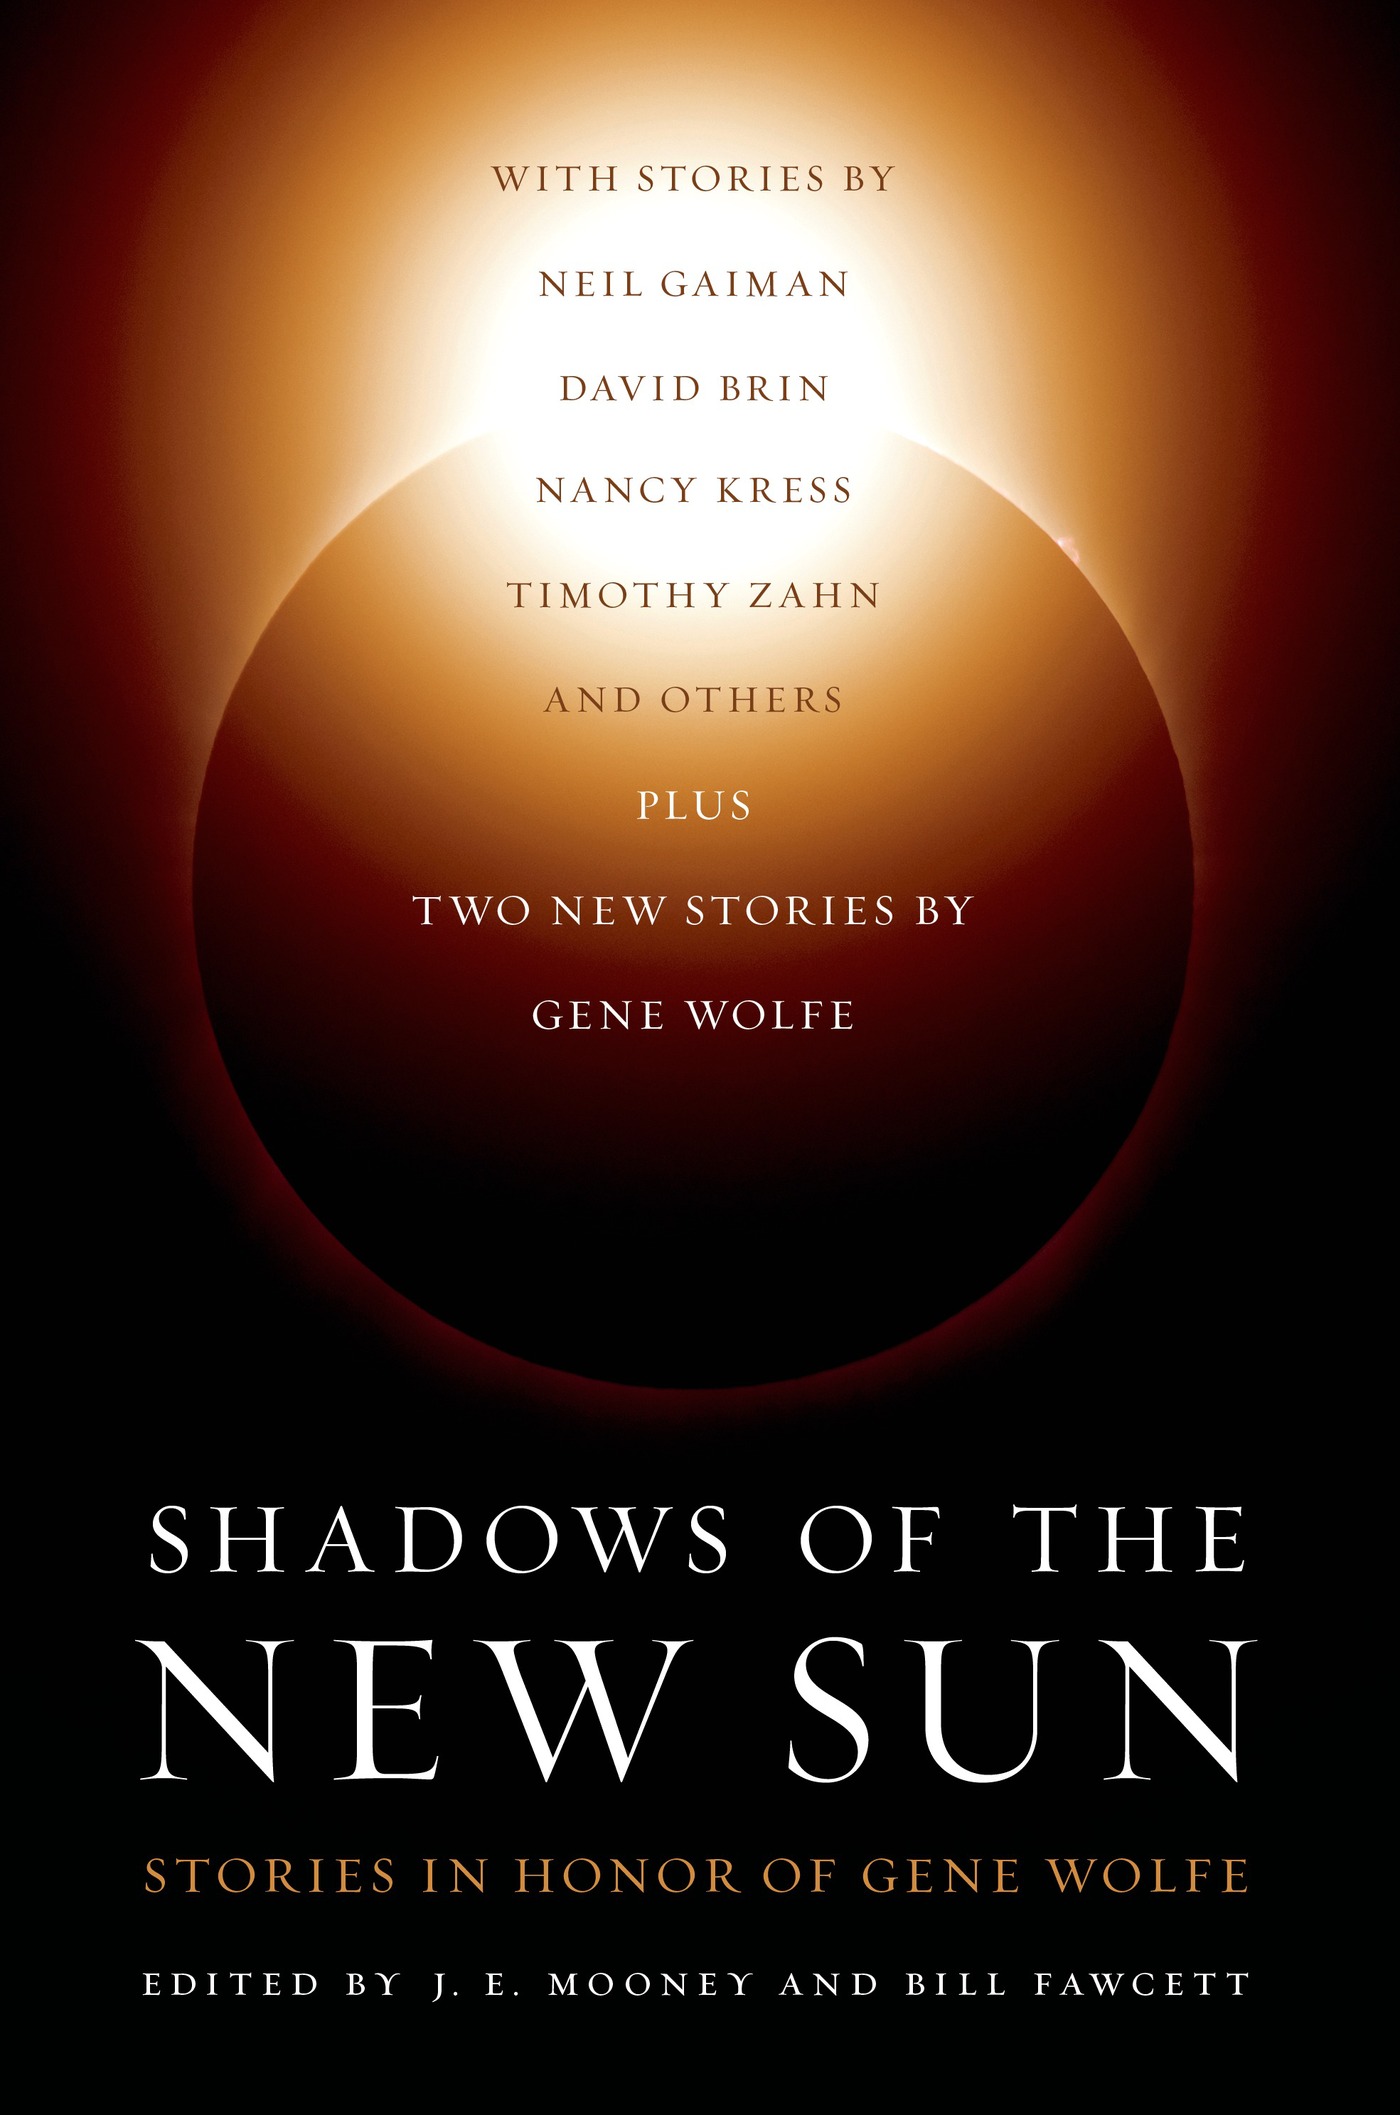 Shadows of the New Sun : Stories in Honor of Gene Wolfe by J. E. Mooney, Bill Fawcett